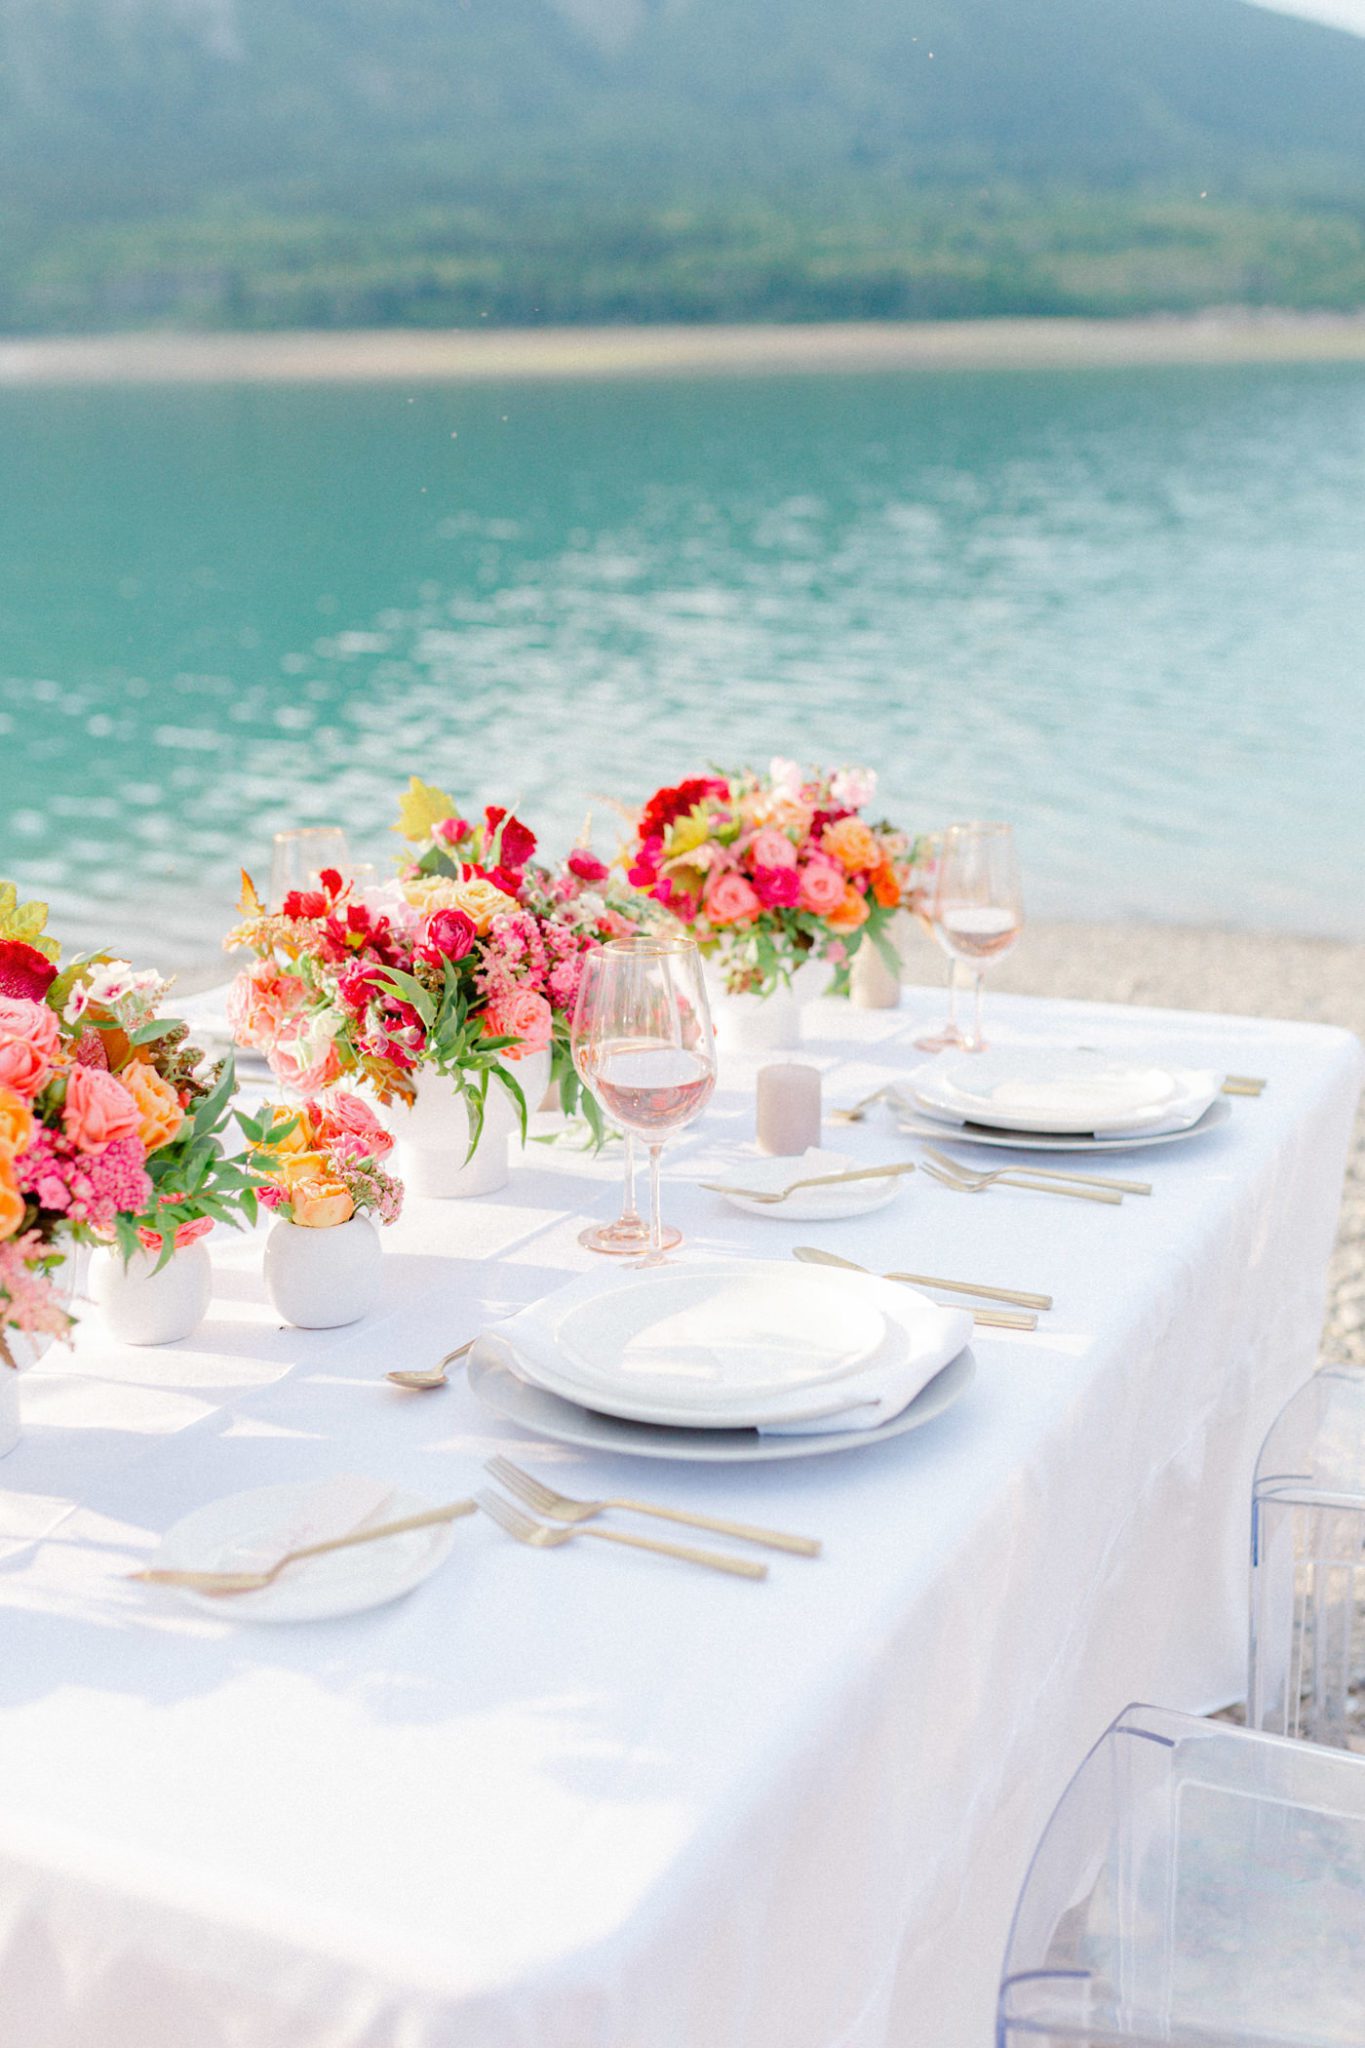 Dreamy lakeside wedding tablescape with vibrant summer flowers